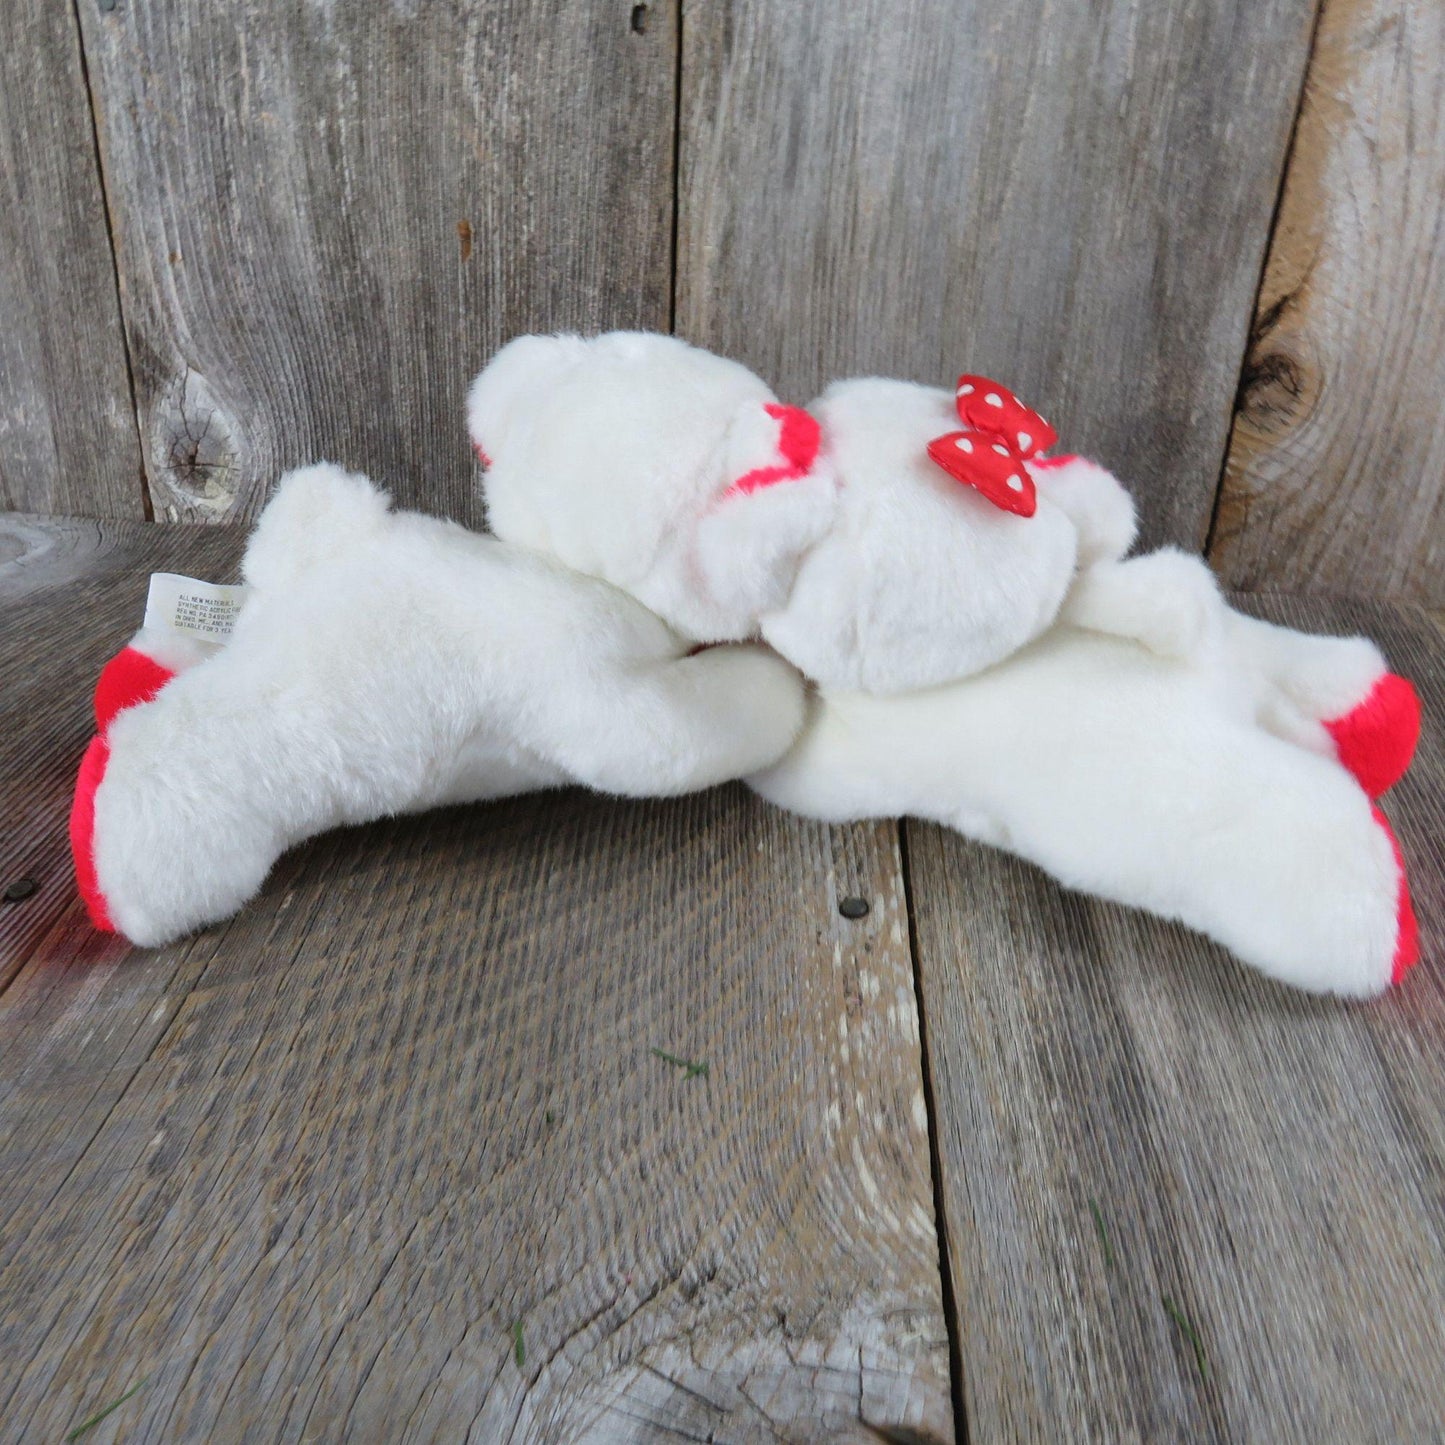 Vintage White Hugging Bears Plush I Love You Heart Red Flocked Nose Oriental Trading Company Stuffed Animal Valentines